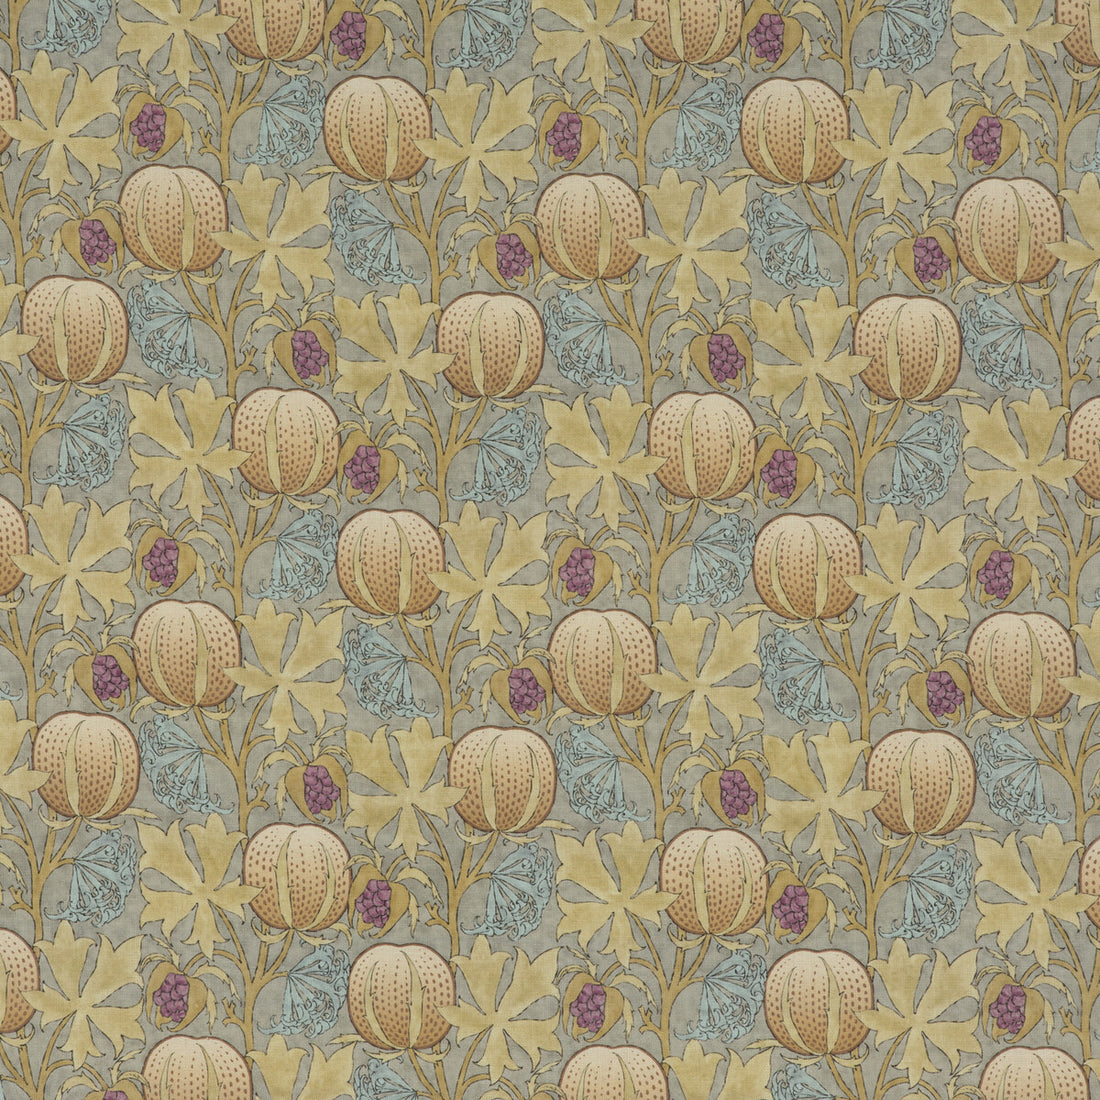 Pumpkins fabric in teal color - pattern BP10621.3.0 - by G P &amp; J Baker in the Originals V collection